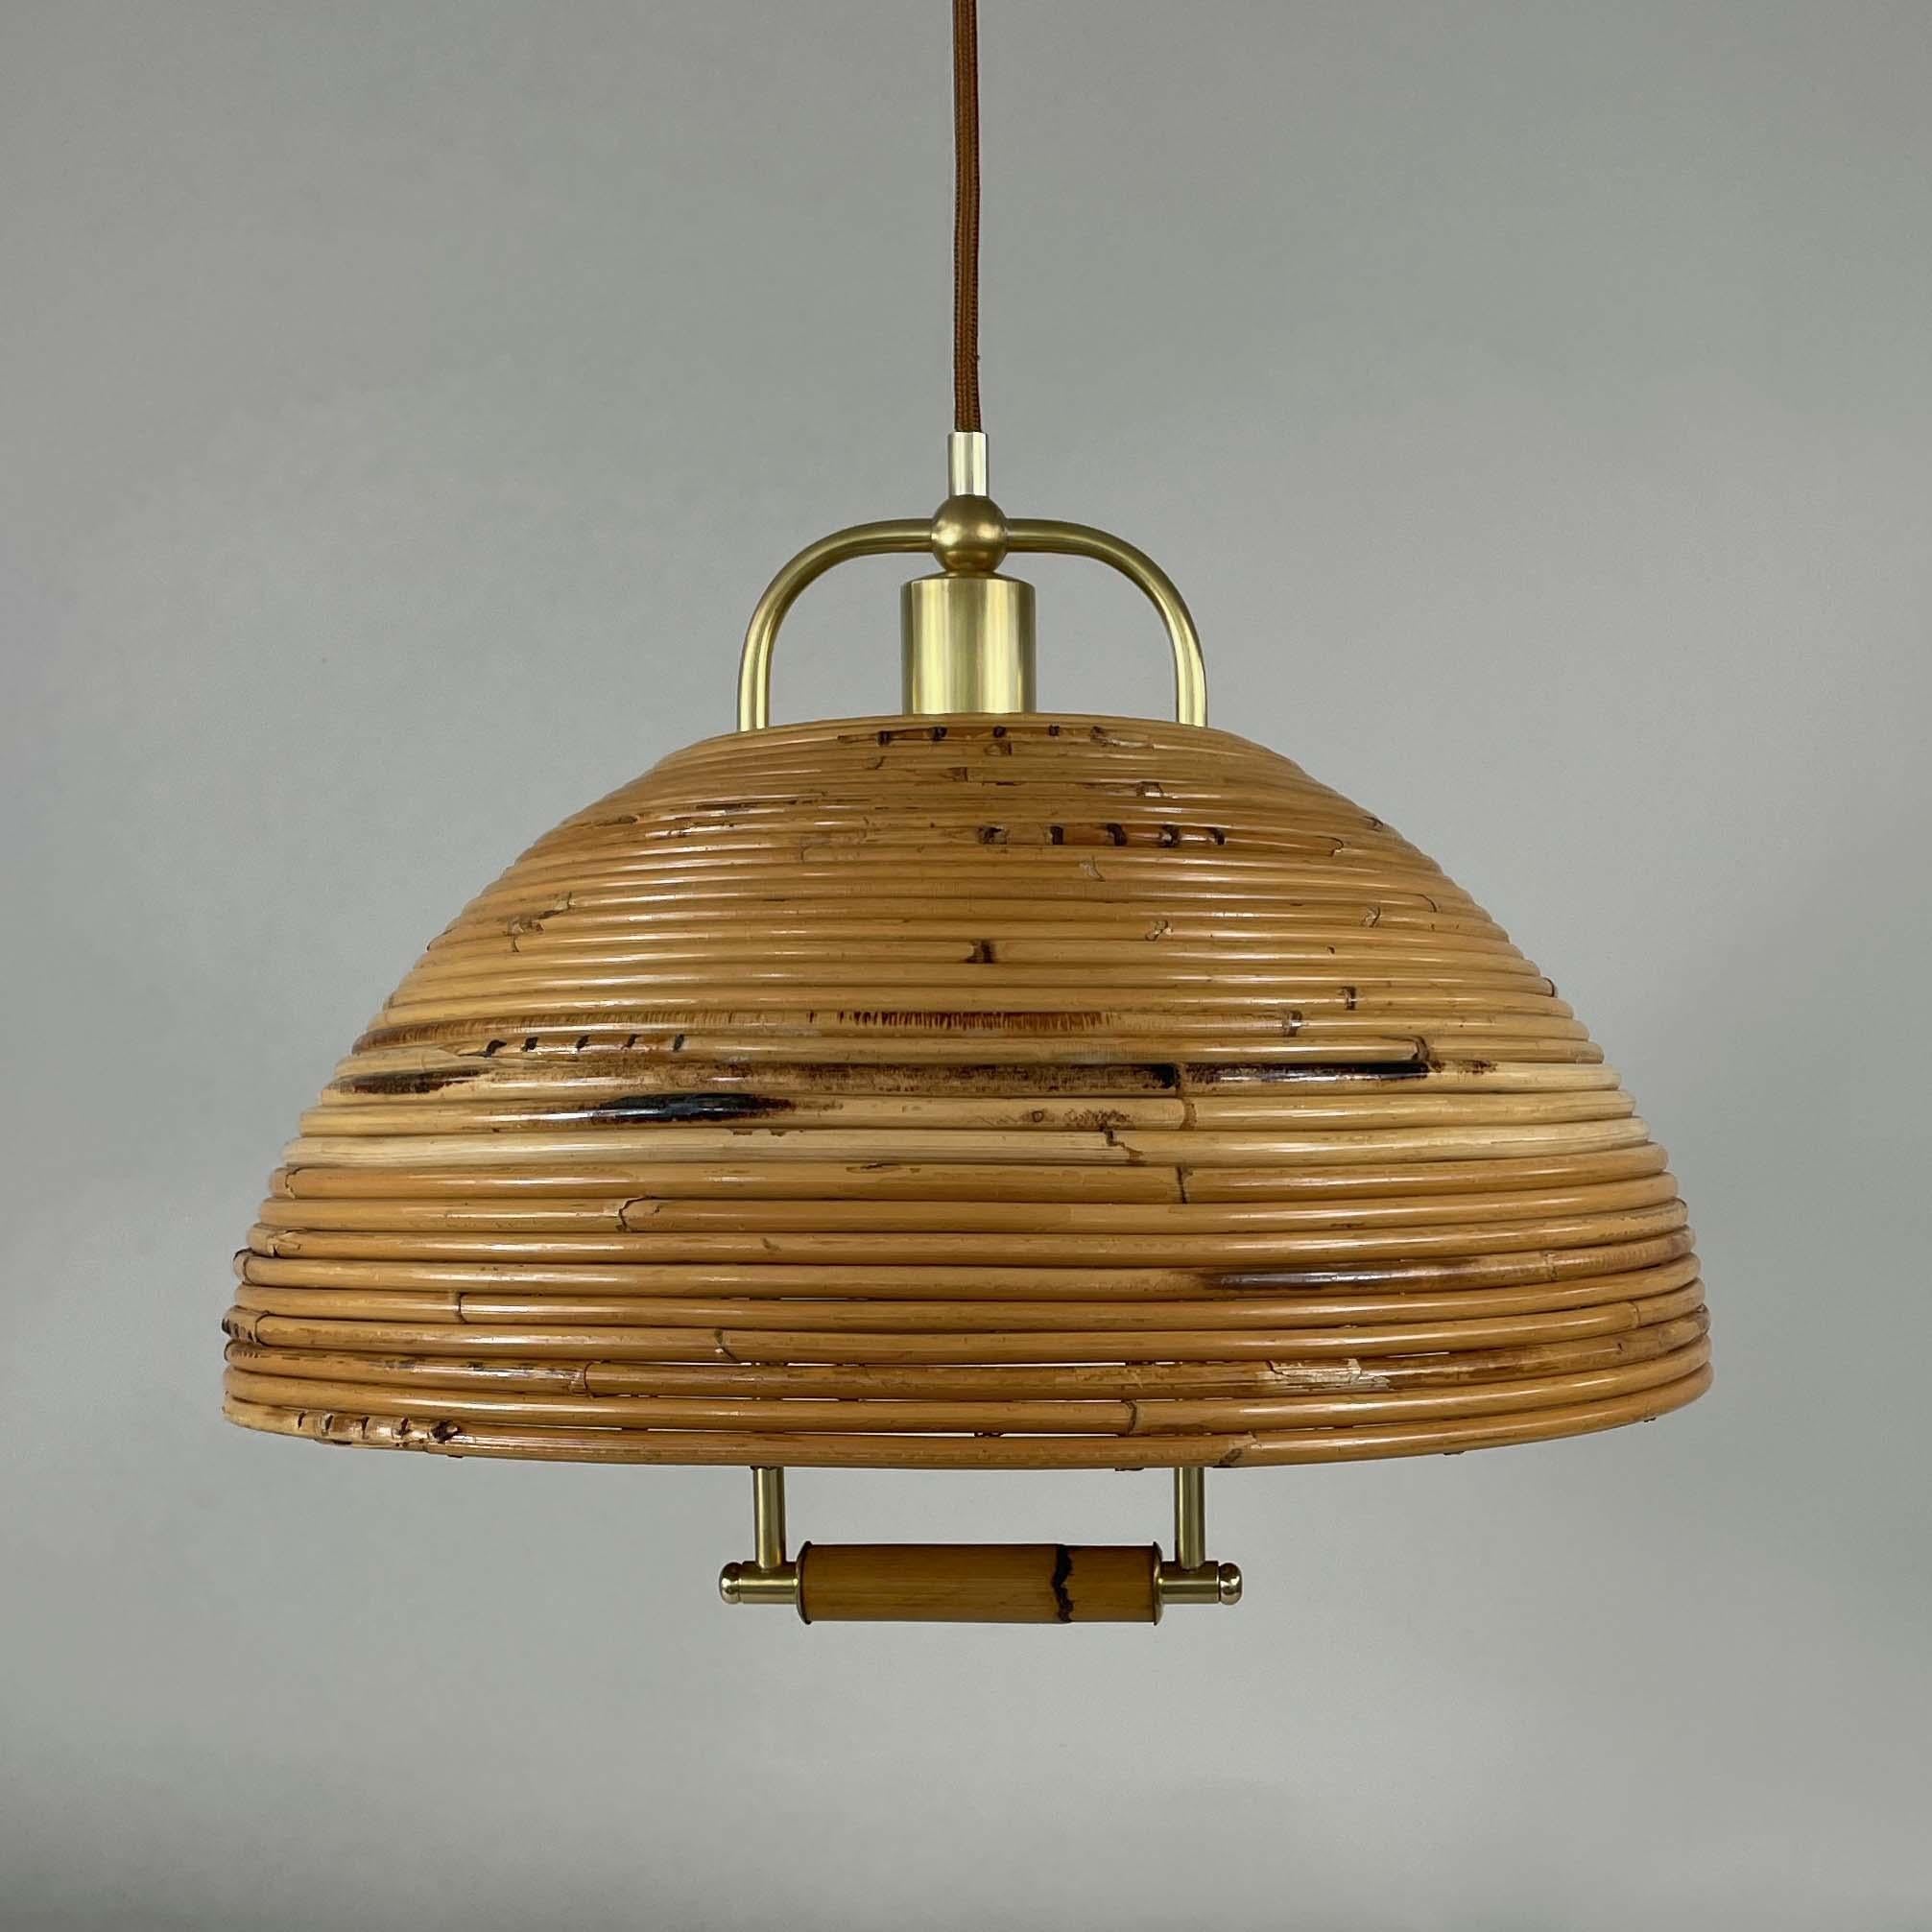 This rattan and bamboo pendant chandelier or suspension light was designed and manufactured in Italy in the 1960s. It features a large dome shaped lampshade with brass hardware. 

The light has been rewired with new fabric cord for use in US and any